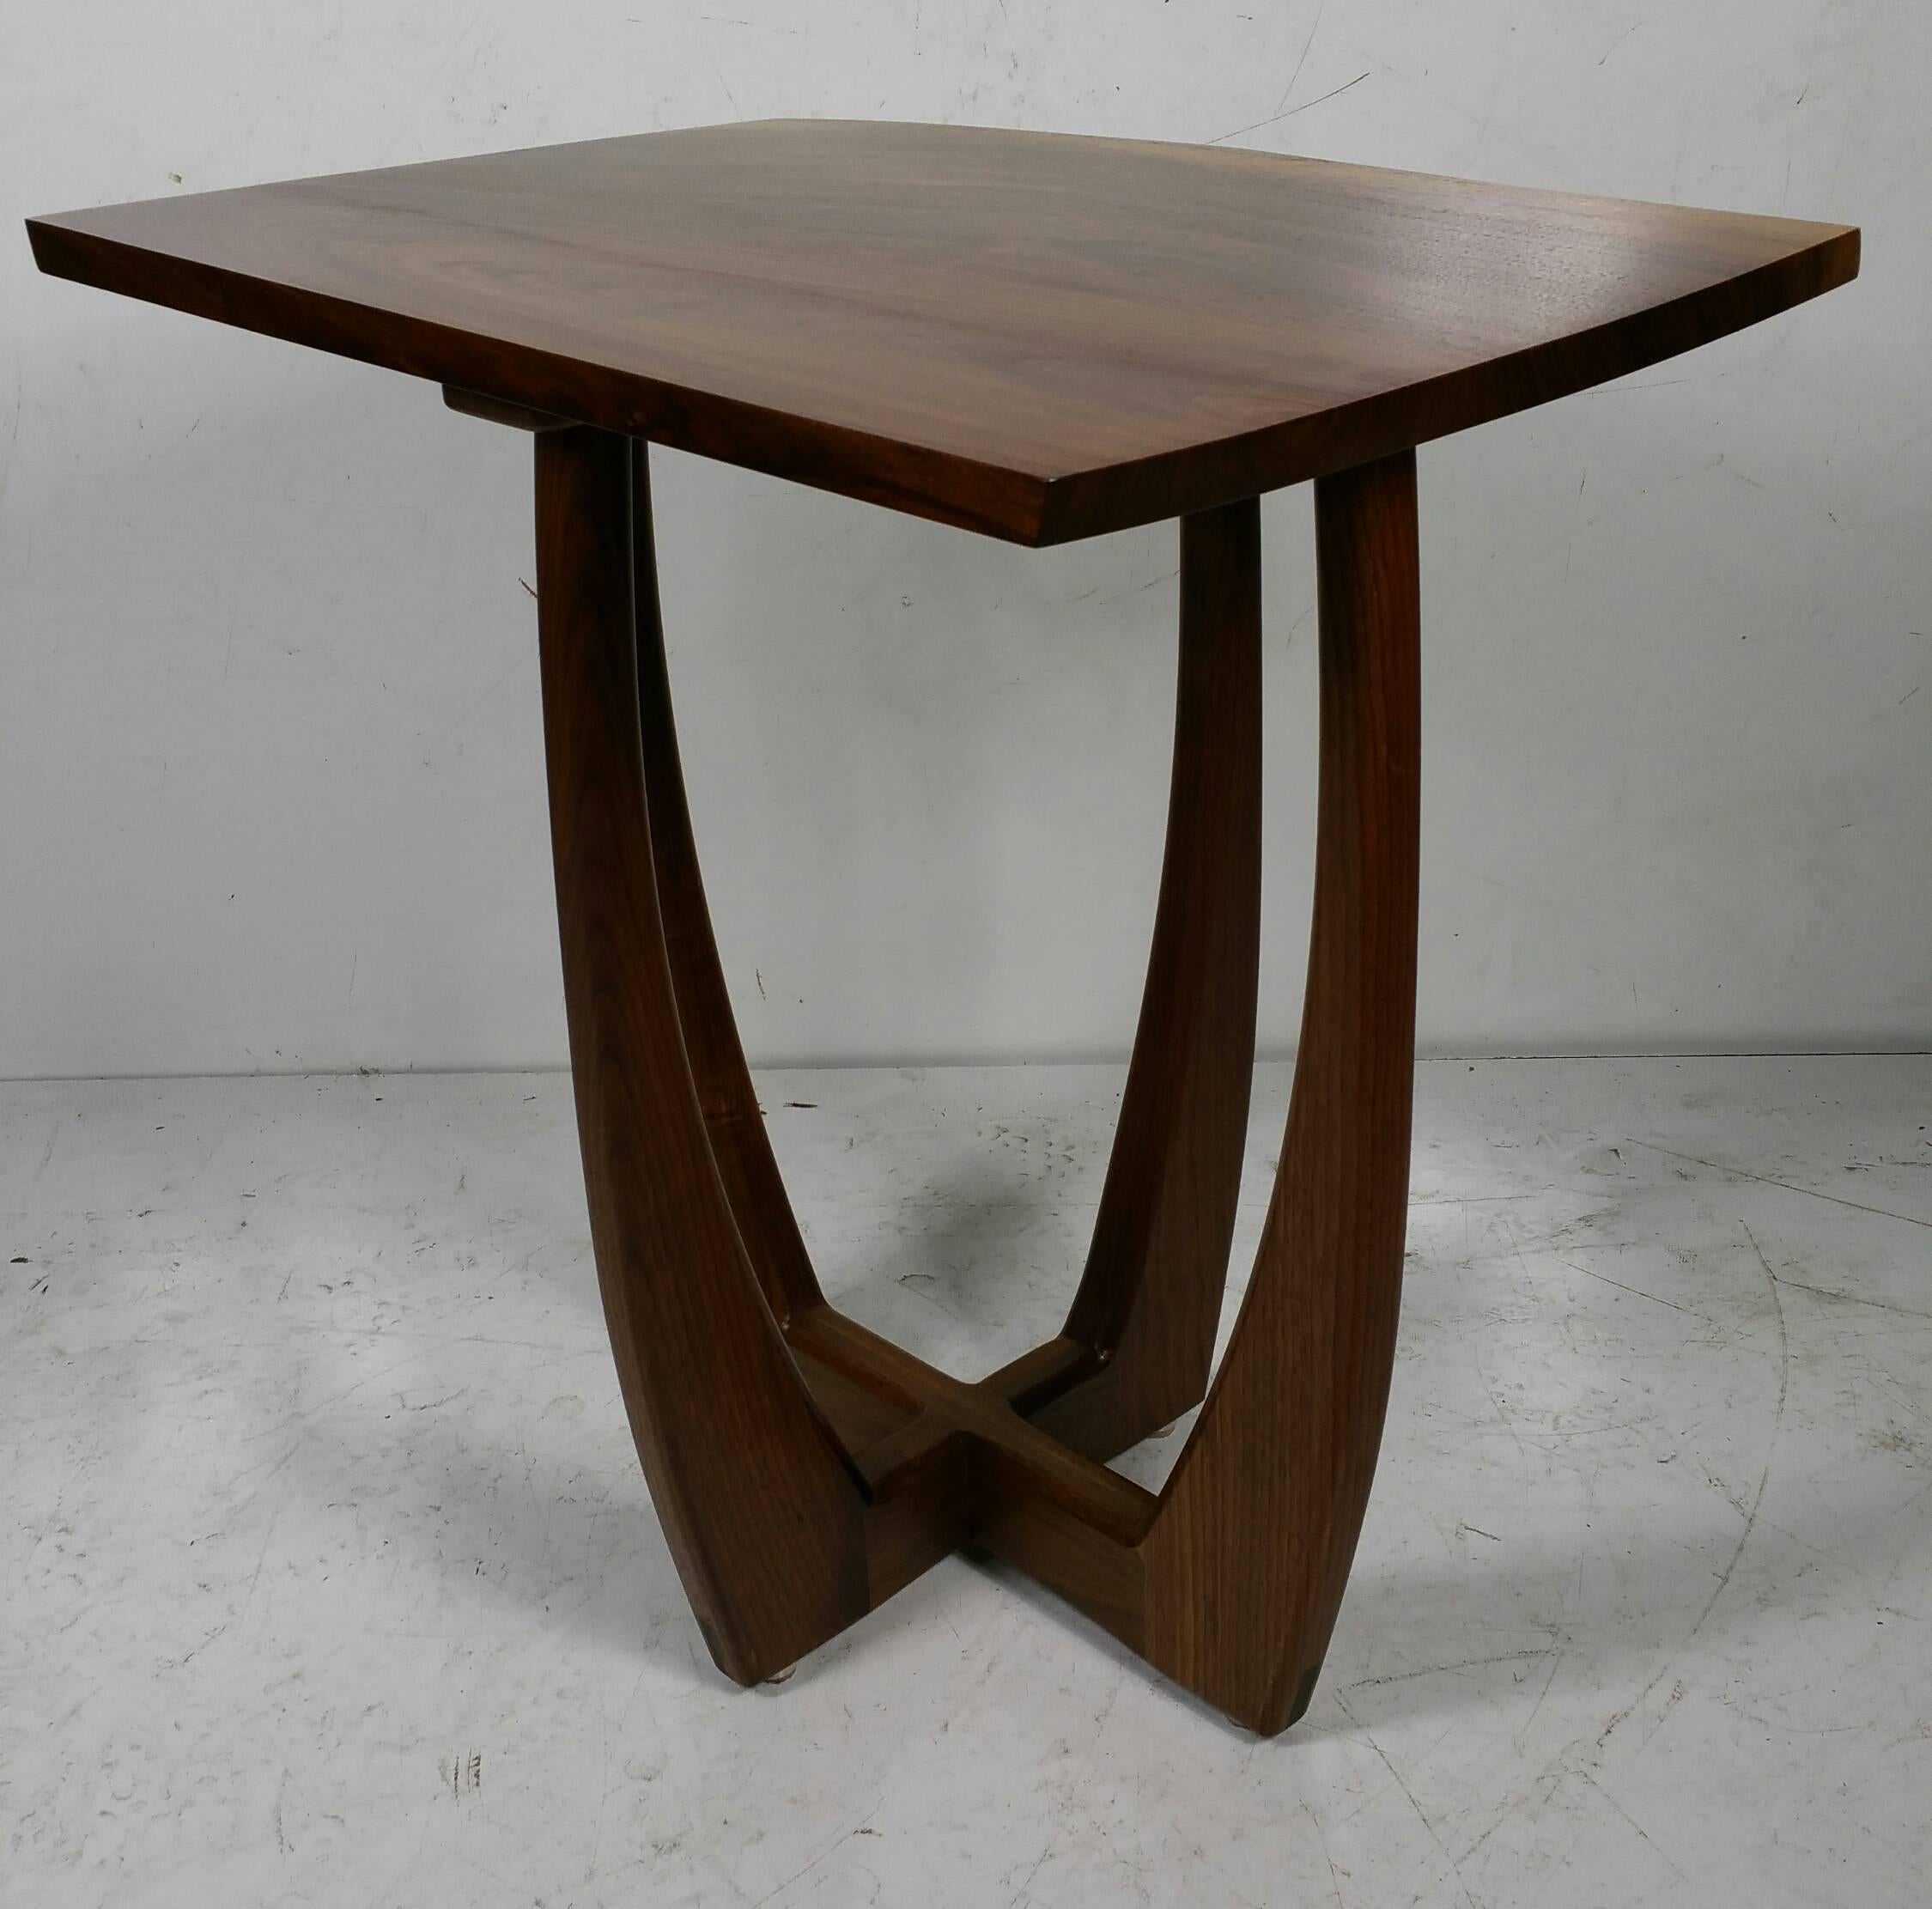 Figured walnut modernist table, Griff Logan exhibits :
2013 Arts Council For Wyoming County, Perry, NY, “Local Color”
2007–present Ashwood Artisans, East Aurora, NY

Education:
1987-1988 Graphic Careers Design School, Rochester, NY,